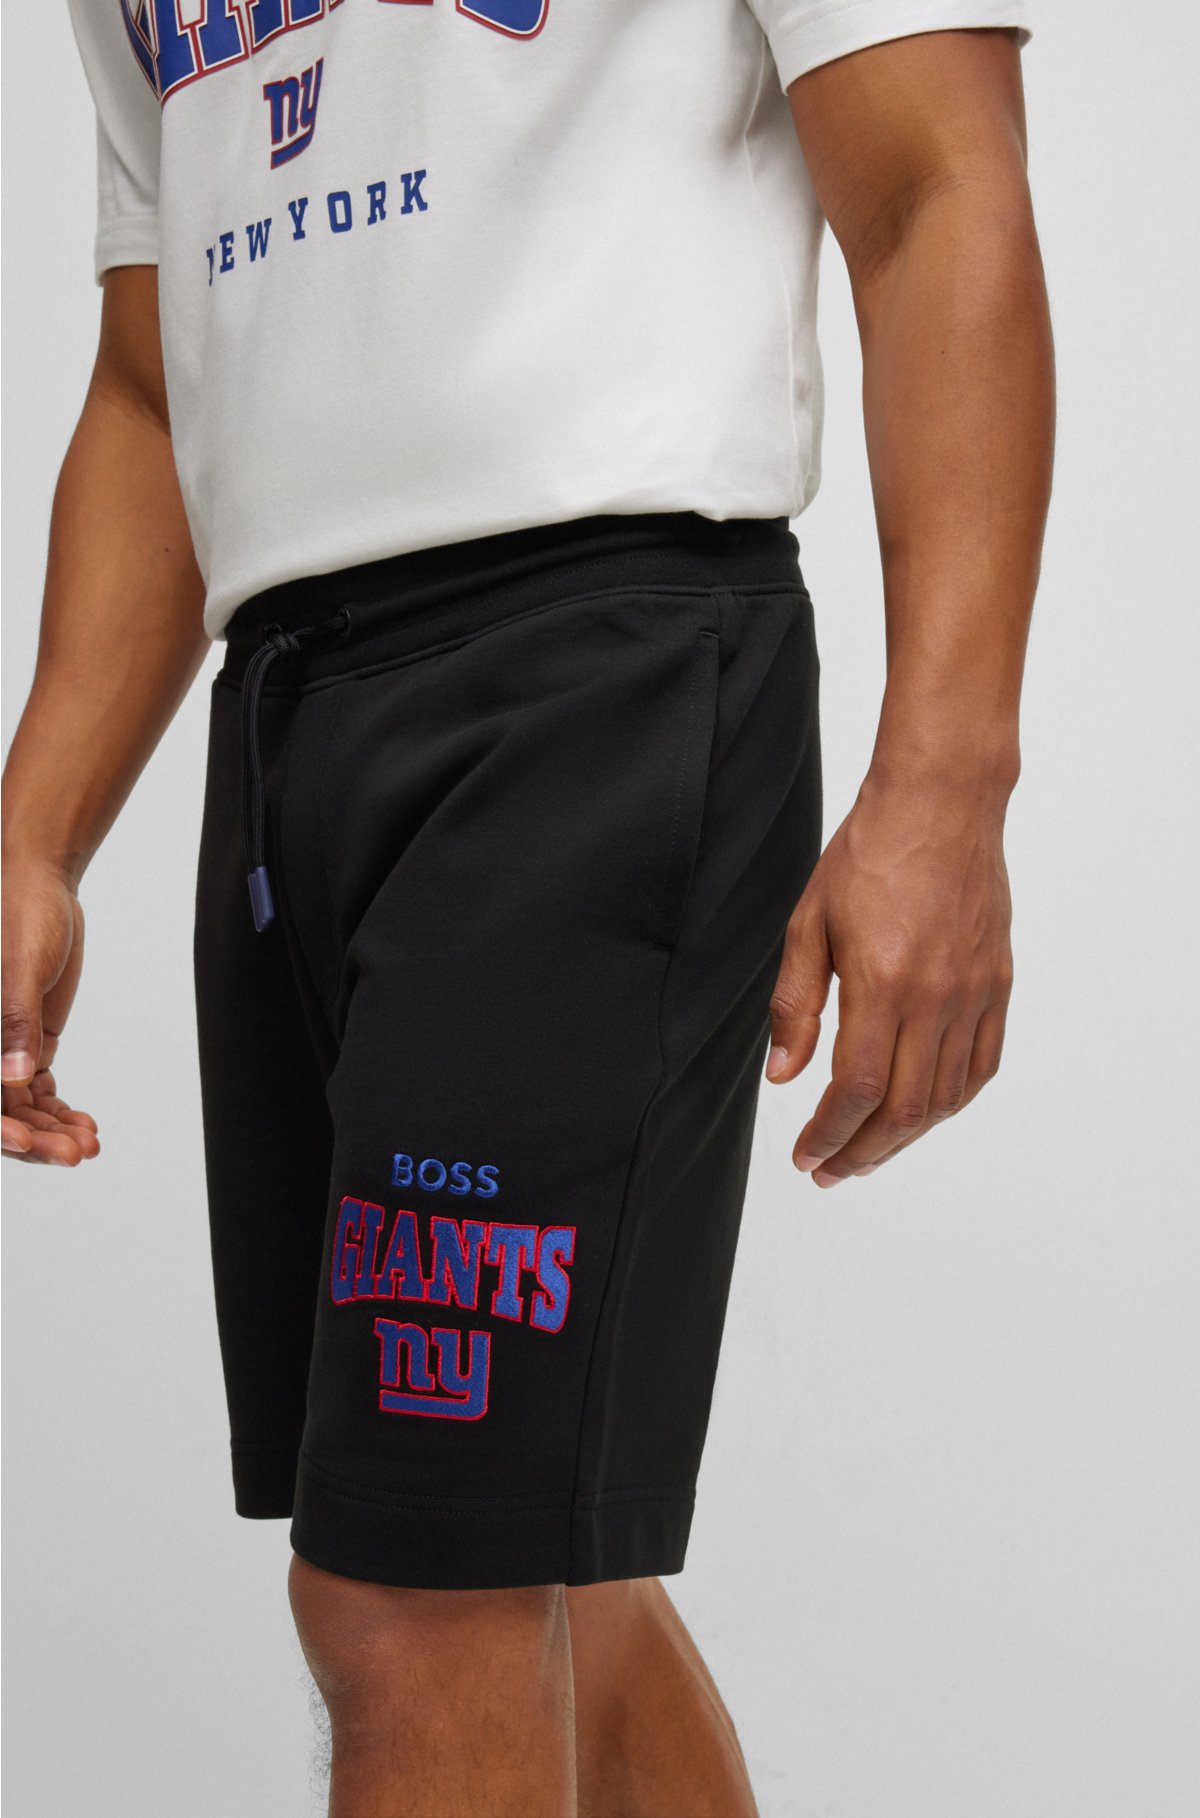 BOSS x NFL cotton-terry shorts with collaborative branding, Giants